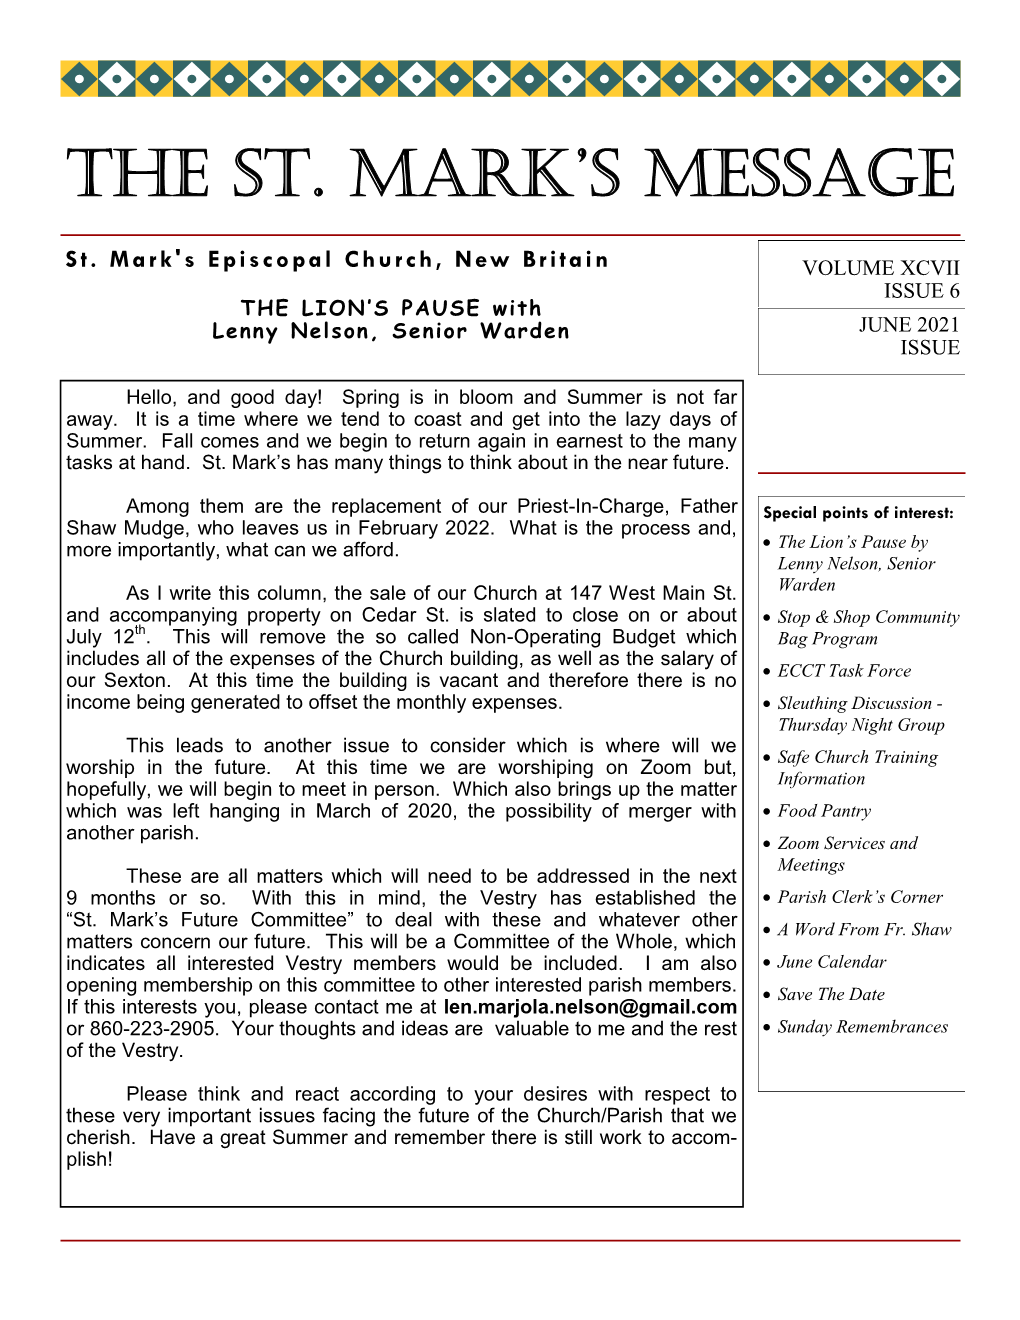 The St. Mark's Message